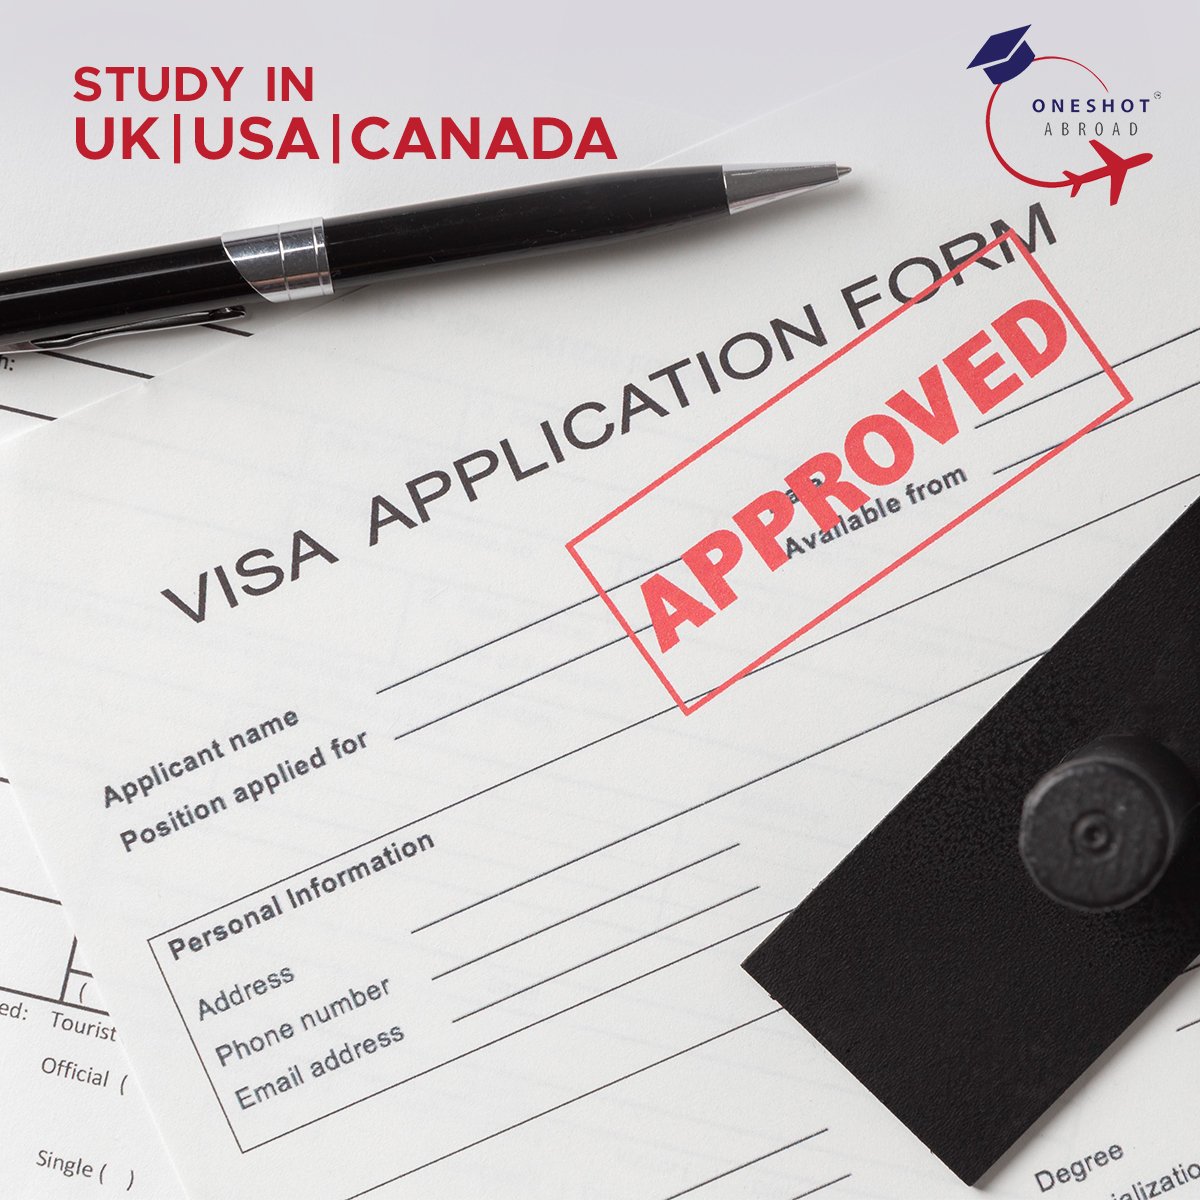 Student's Visa Approved!
Study in UK | USA | Canada

Enroll Now @oneshotabroad
.
.
.
.
.
#studyincanada #studyinuk #studyinusa #studyabroad #expertcounsellor #expertcounselling #studyabroadconsultants #education